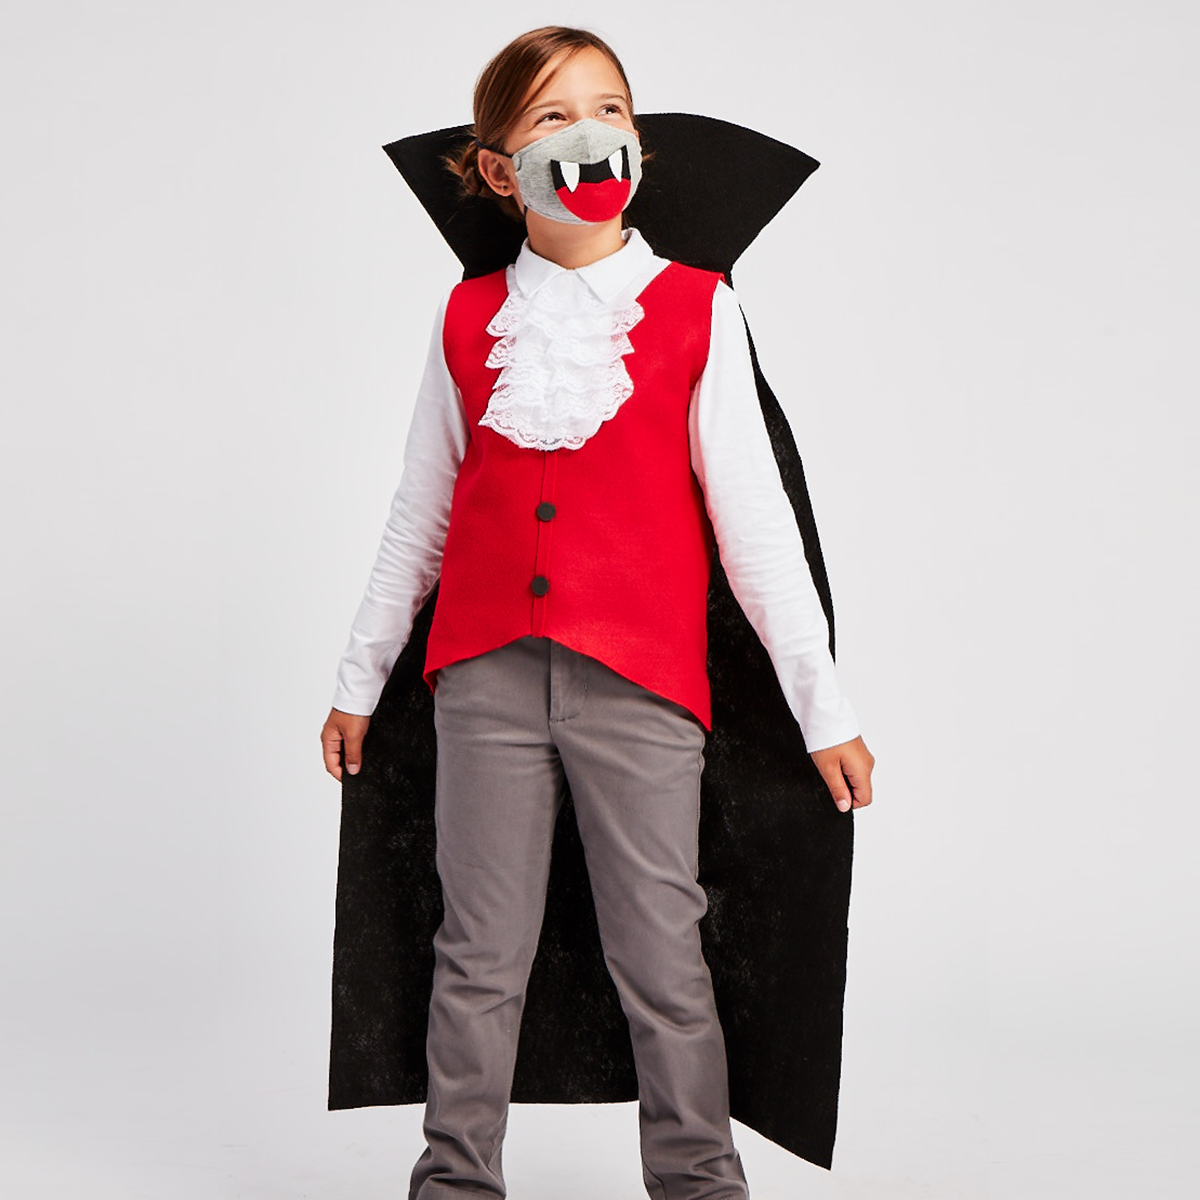 child wearing vampire costume with a face mask